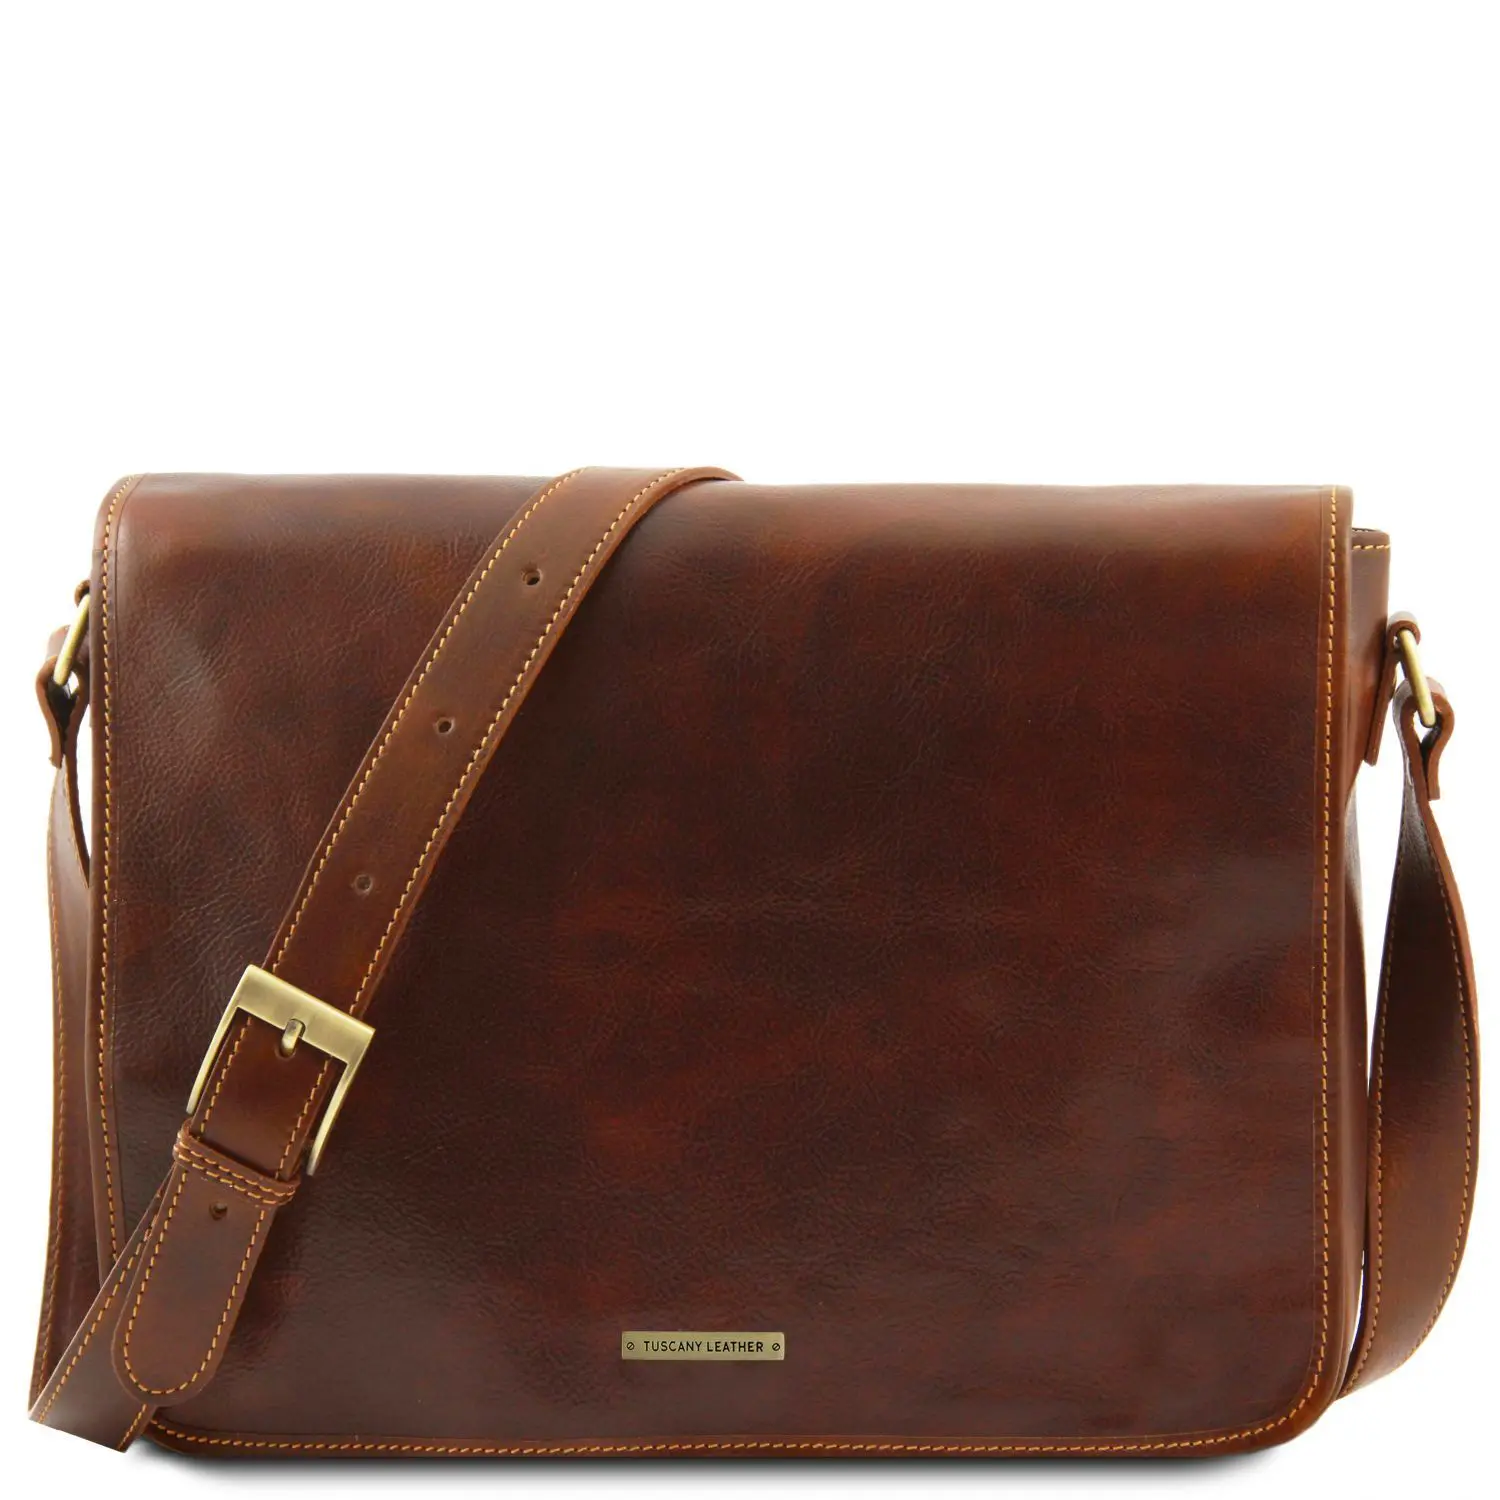 Freestyle Leather Messenger Bag - Double Trouble